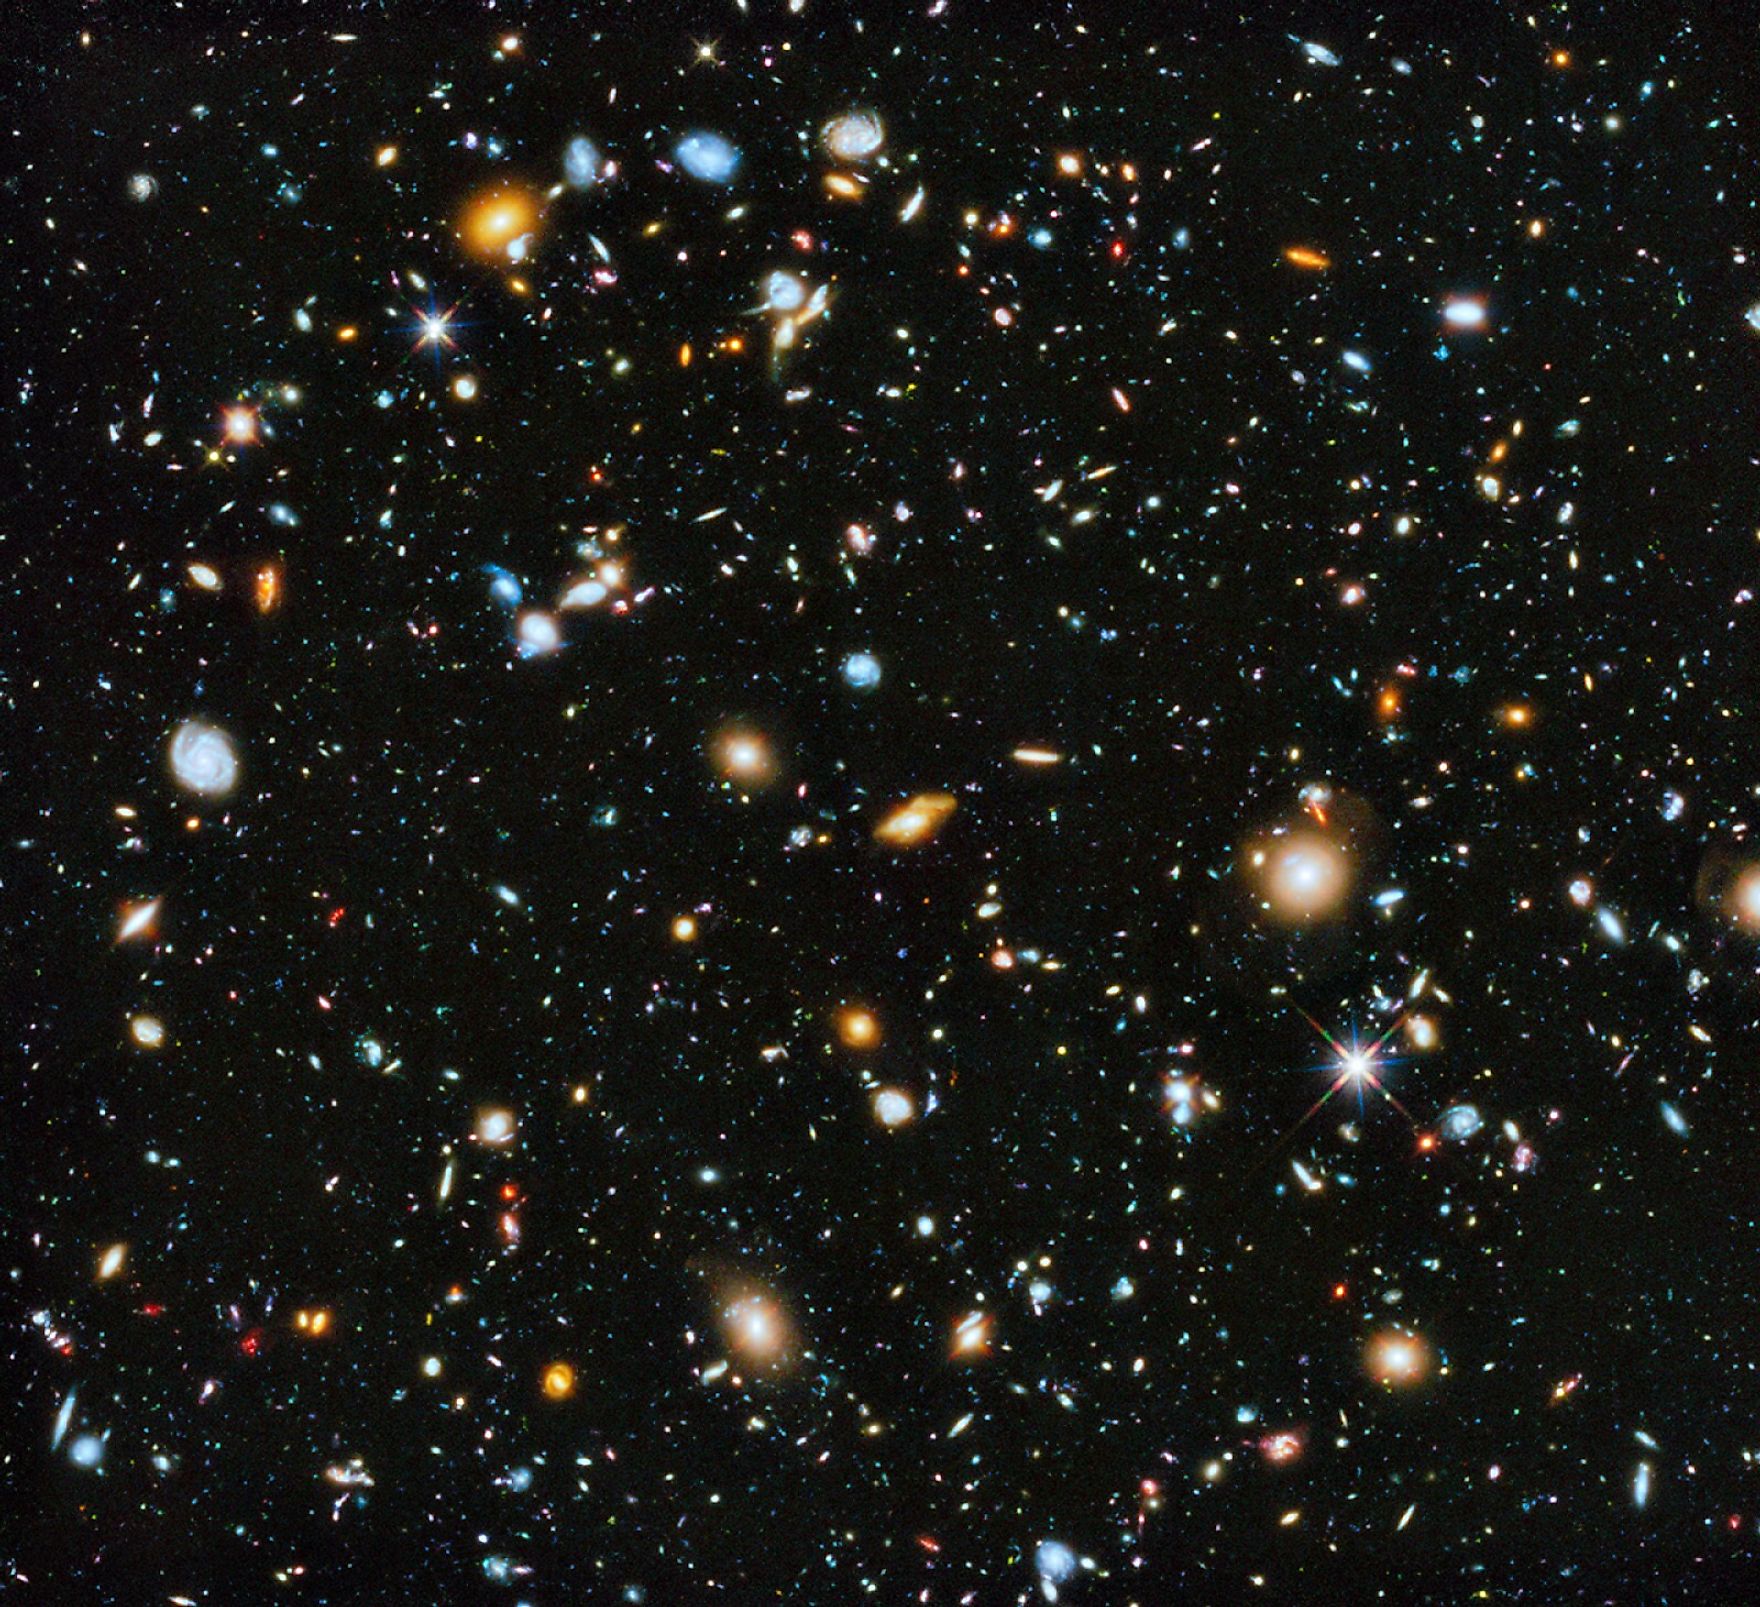 The Hubble Deep Field contains some of the earliest galaxies to form in the universe, NASA